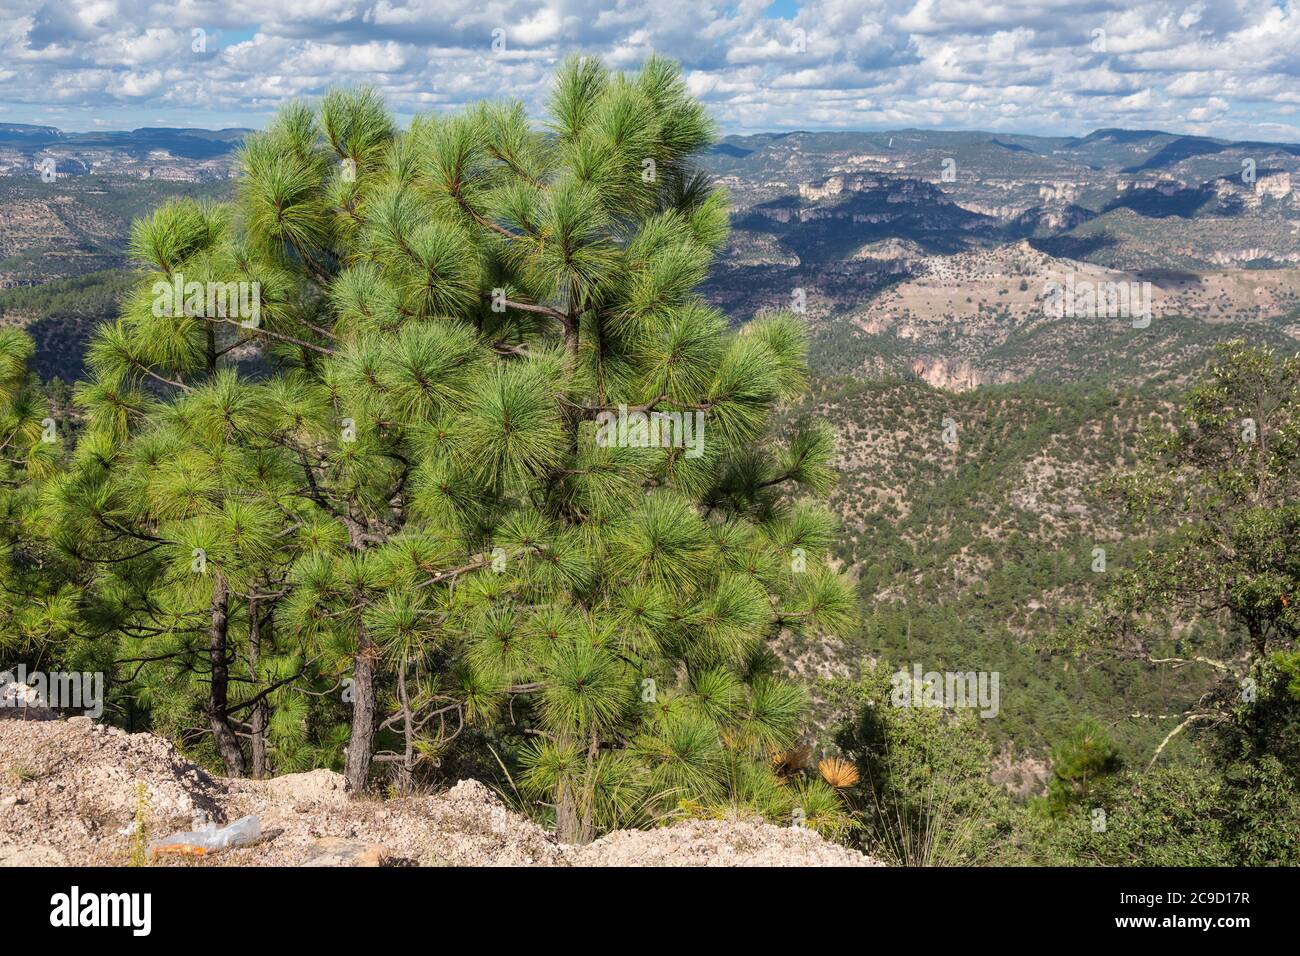 Apache Pine (pinus engelmannii), Urique Canyon in background, part of the Copper Canyon Complex, Chihuahua, Mexico. Stock Photo